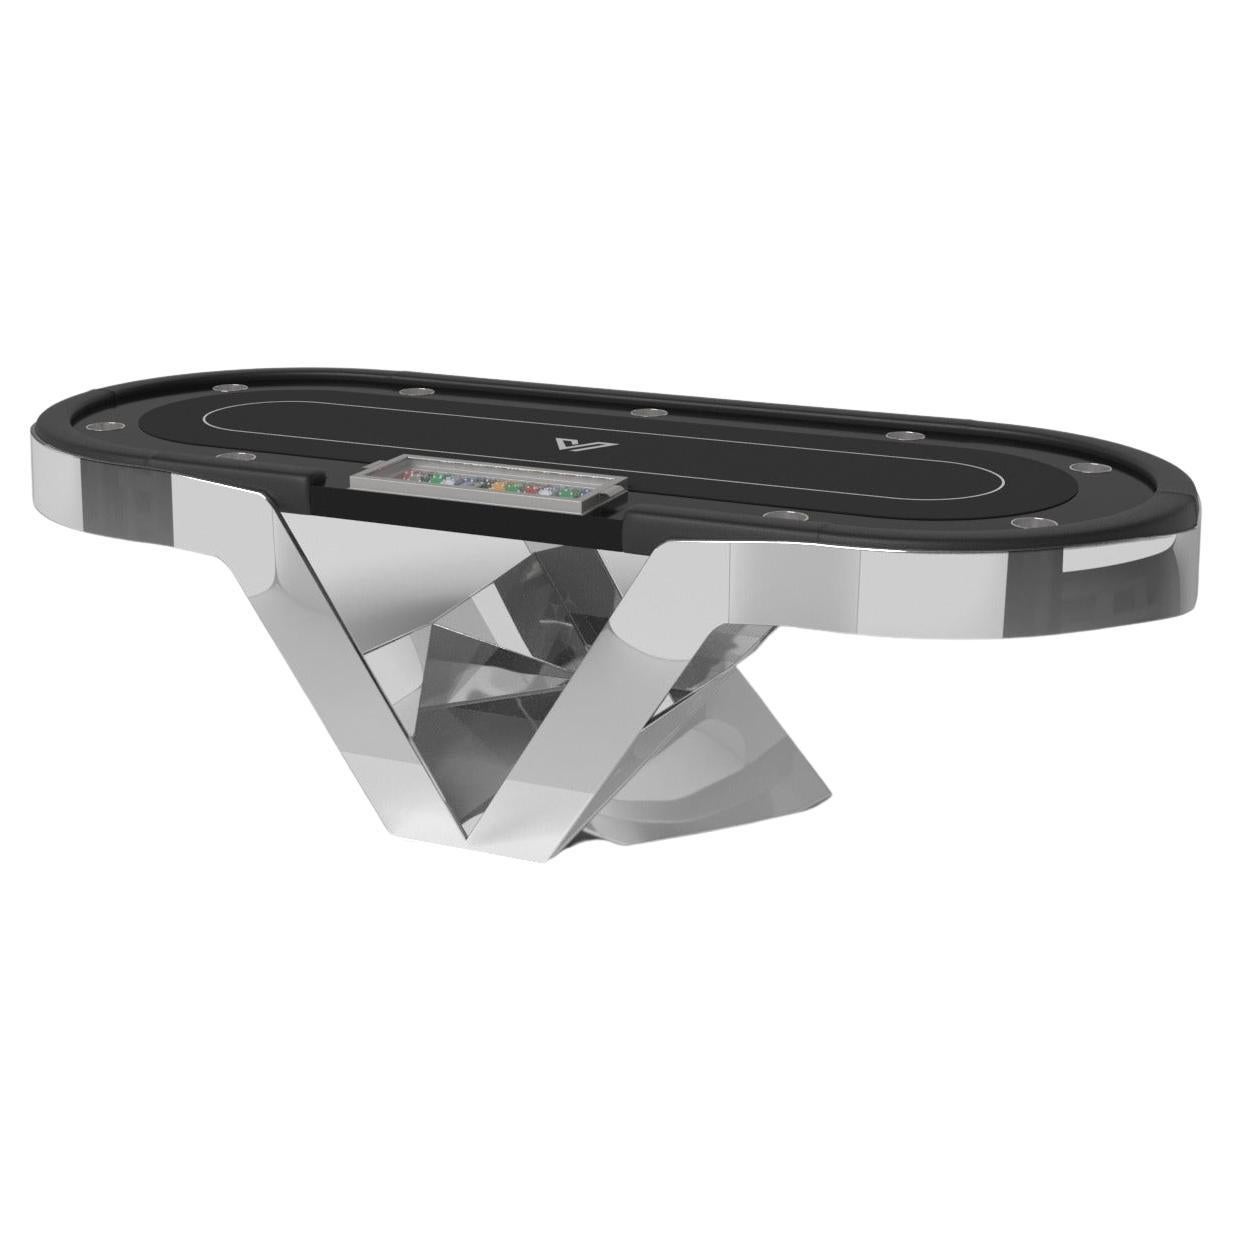 Elevate Customs Enzo Poker Tables / Stainless Steel Sheet Metal in 8'8" - USA For Sale